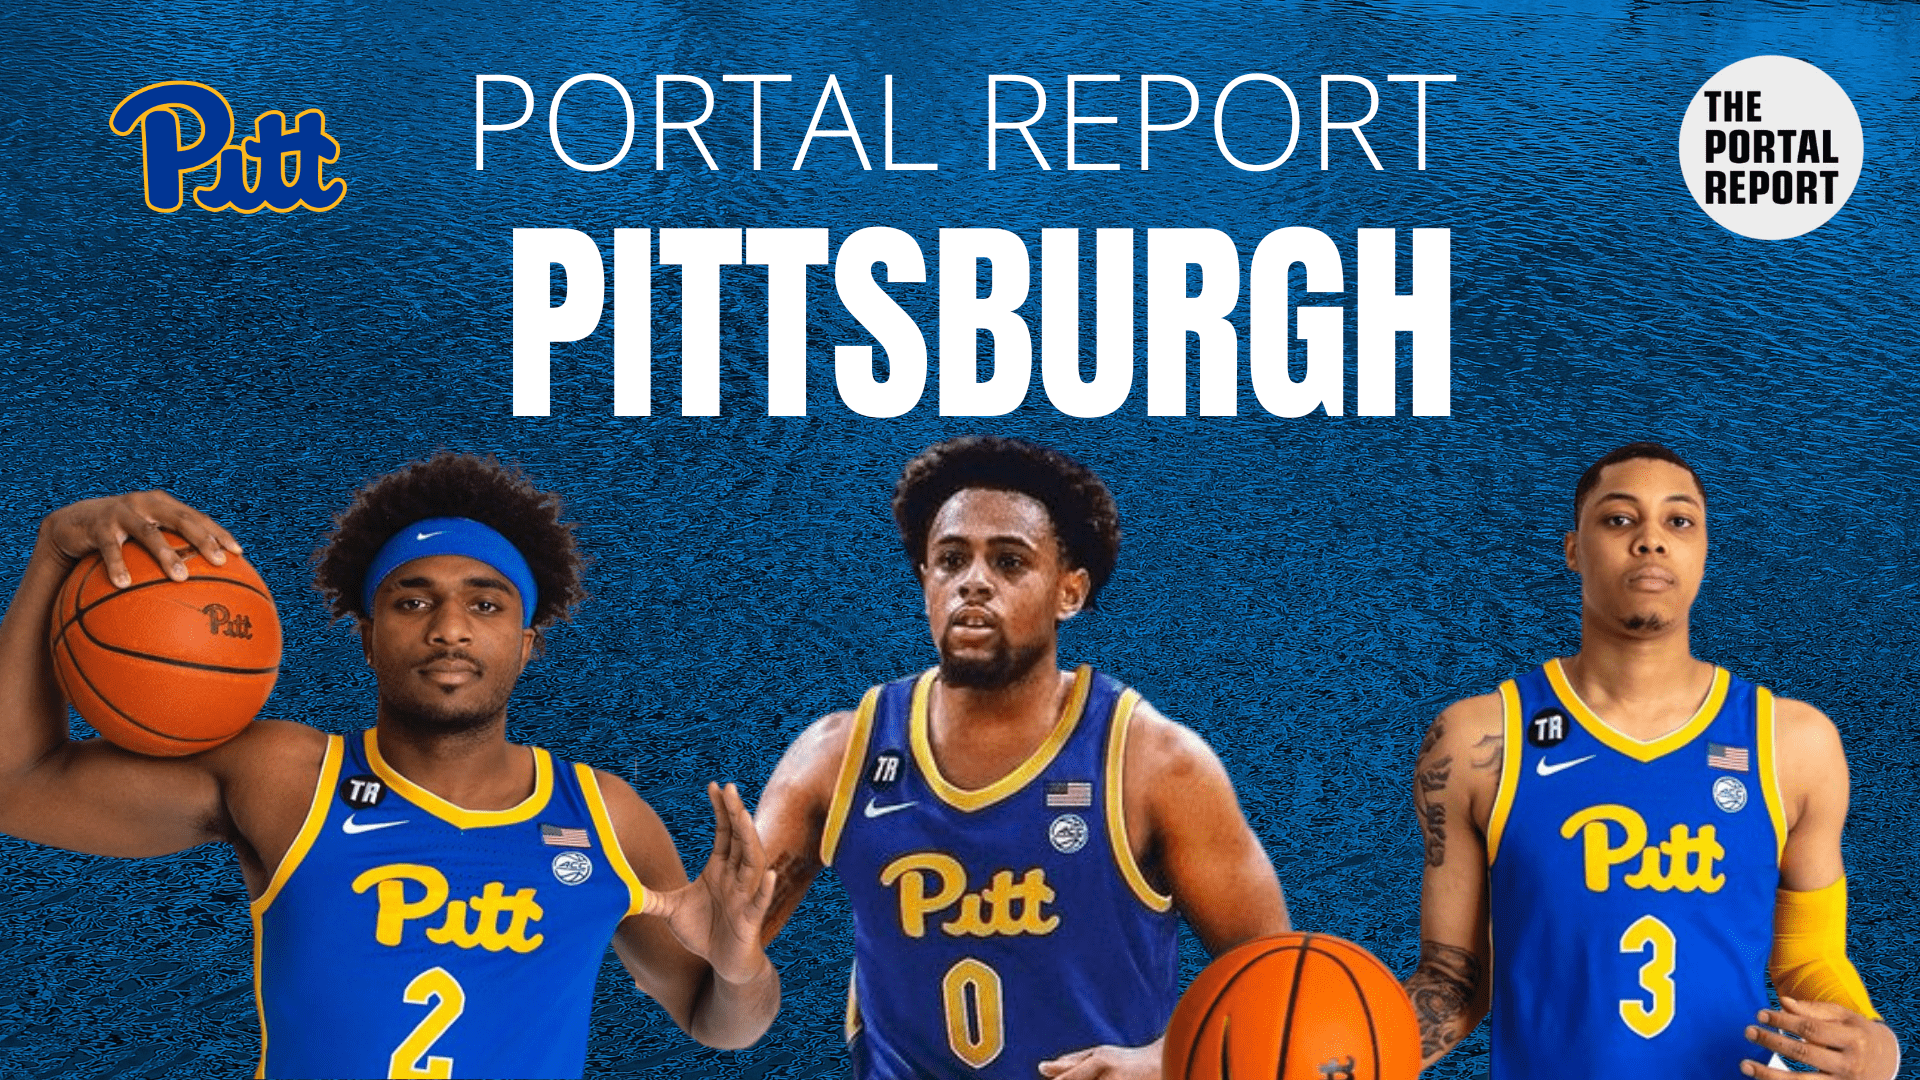 Why Pittsburgh doesn't have a professional basketball team